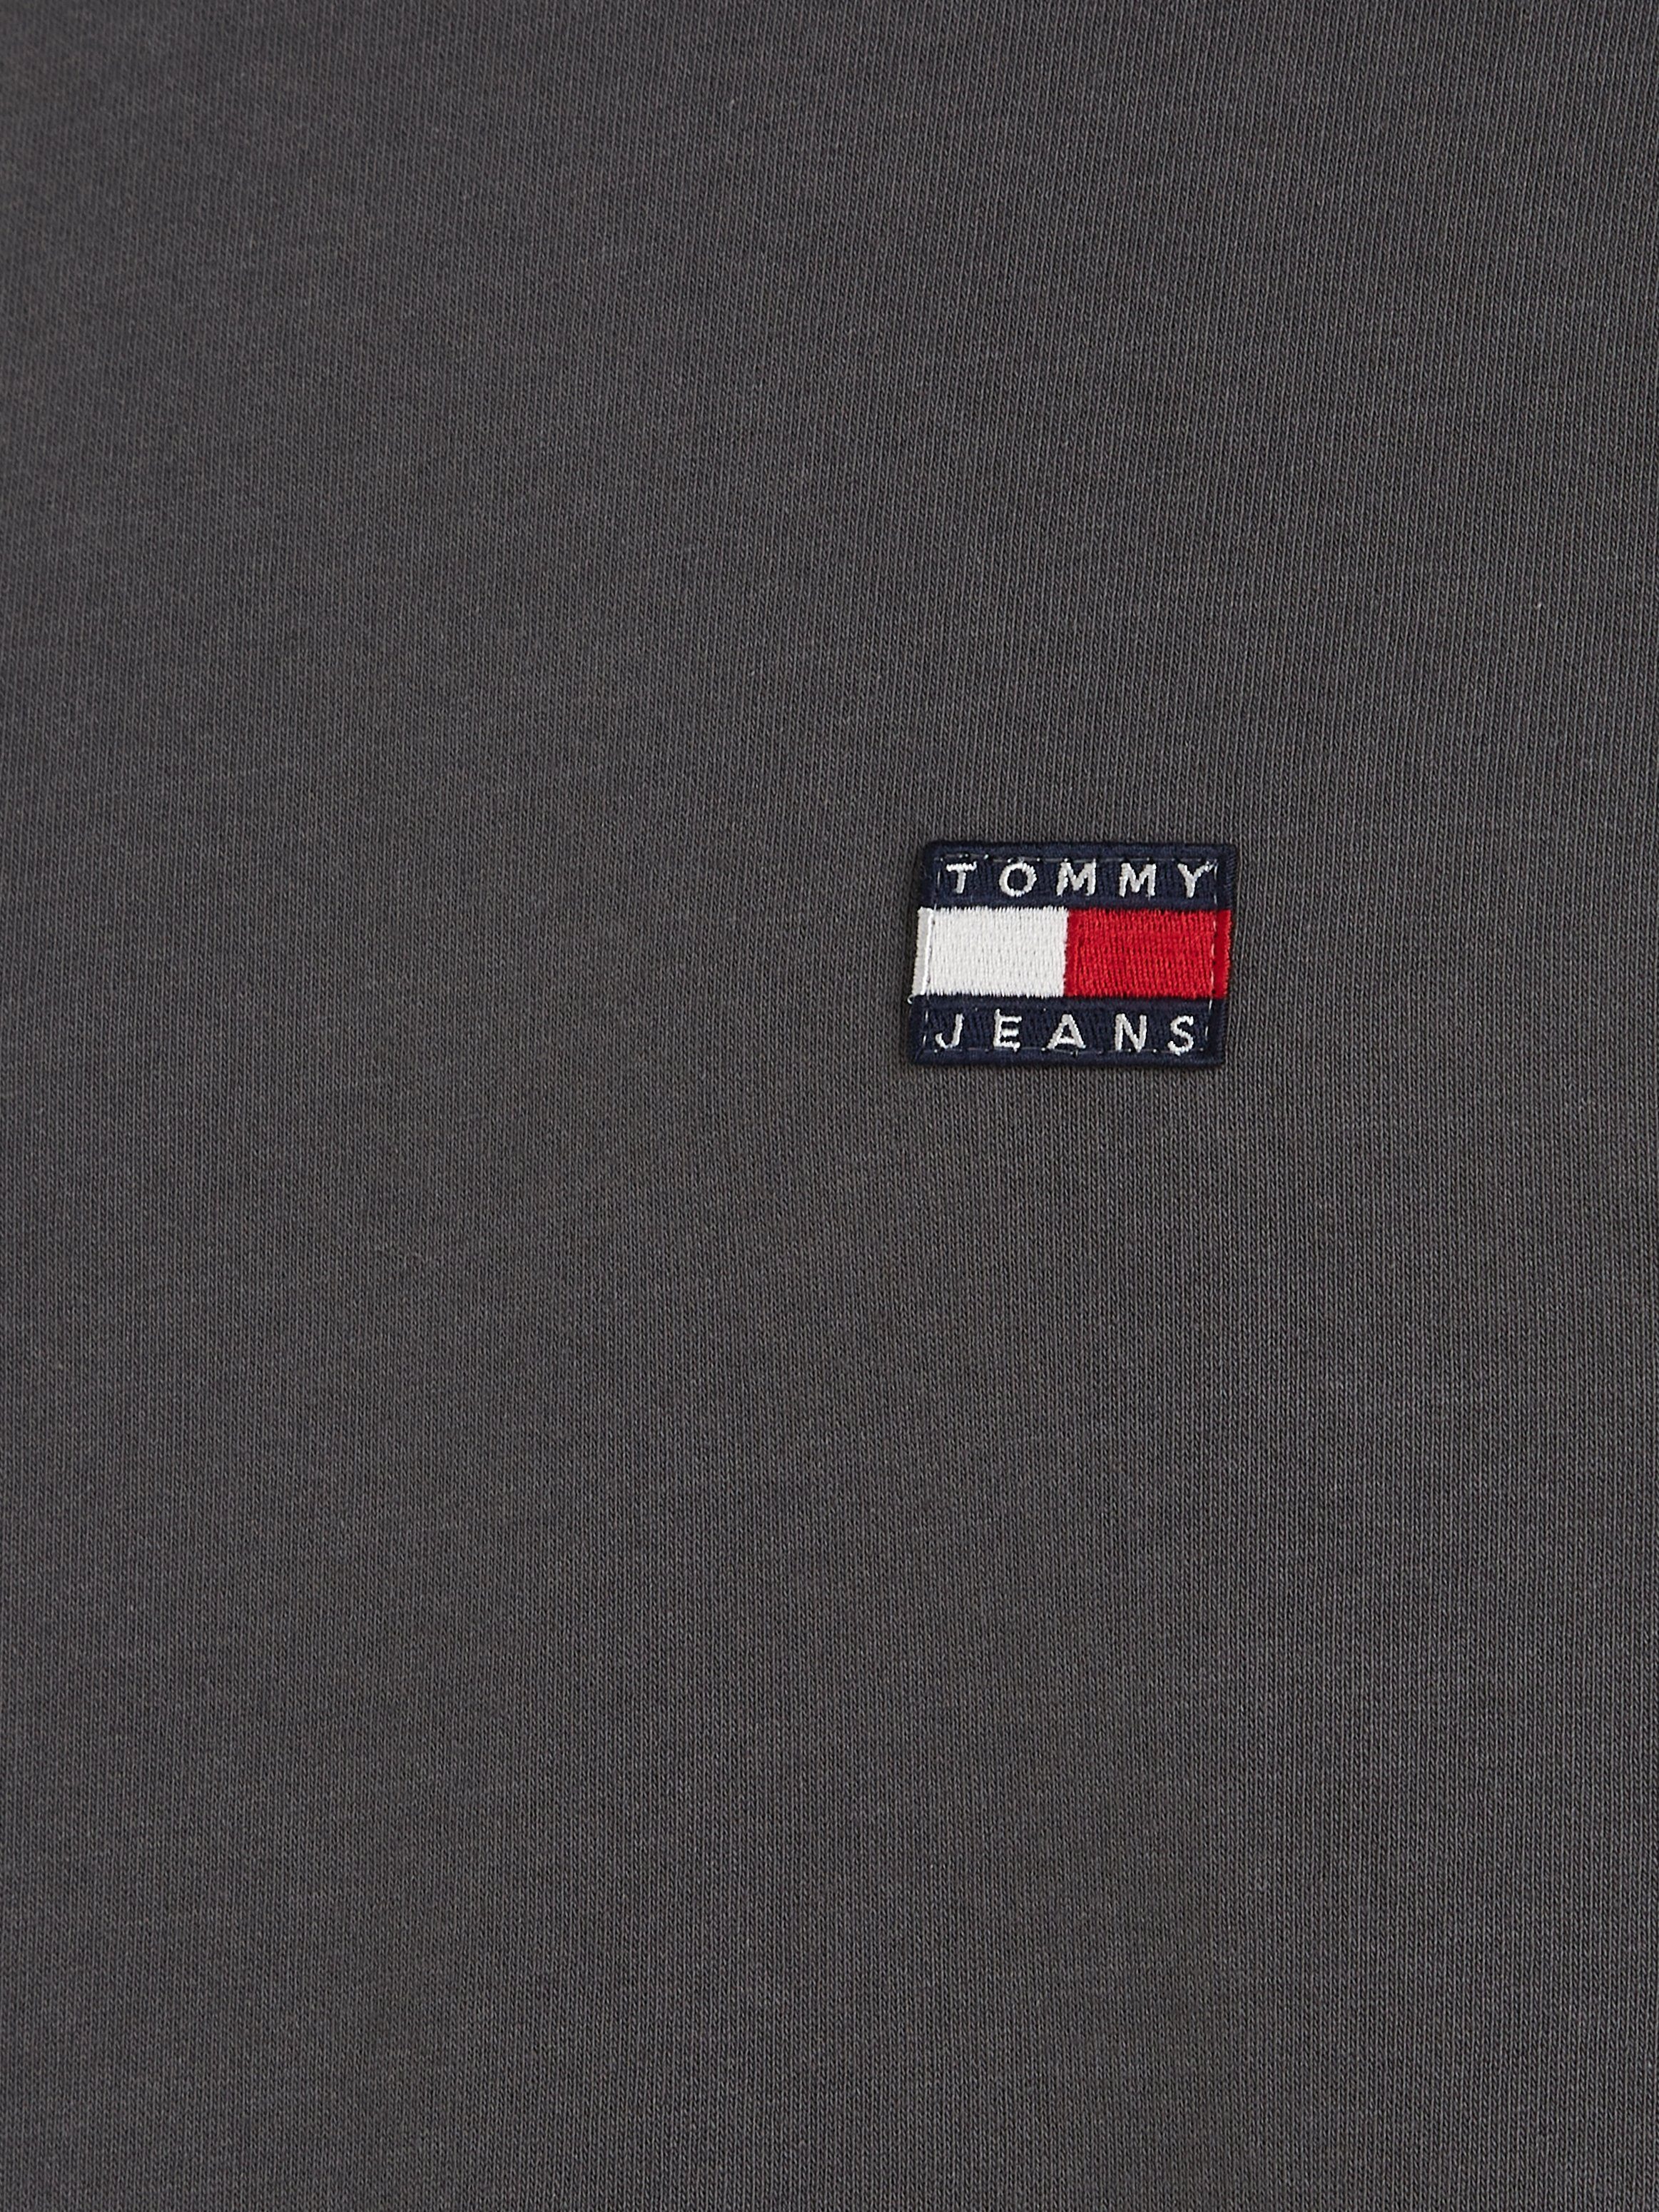 Tommy Jeans T-Shirt TJM CLSC XS TOMMY New BADGE Charcoal TEE